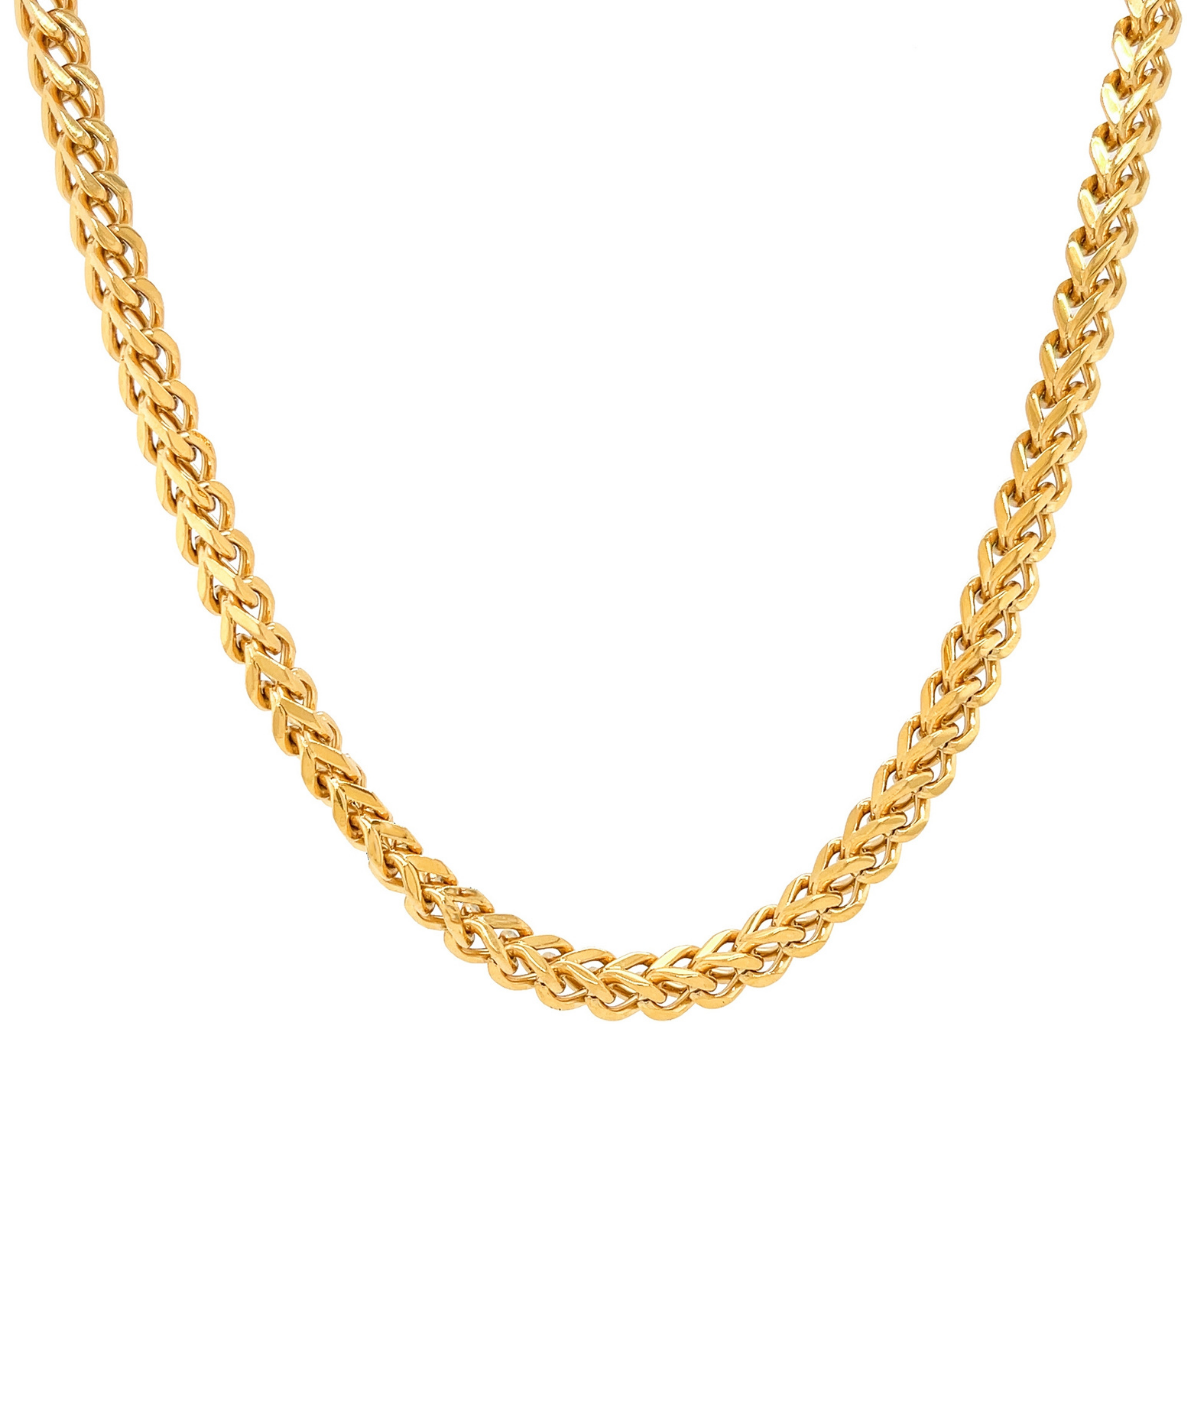 Beck Chain Necklace